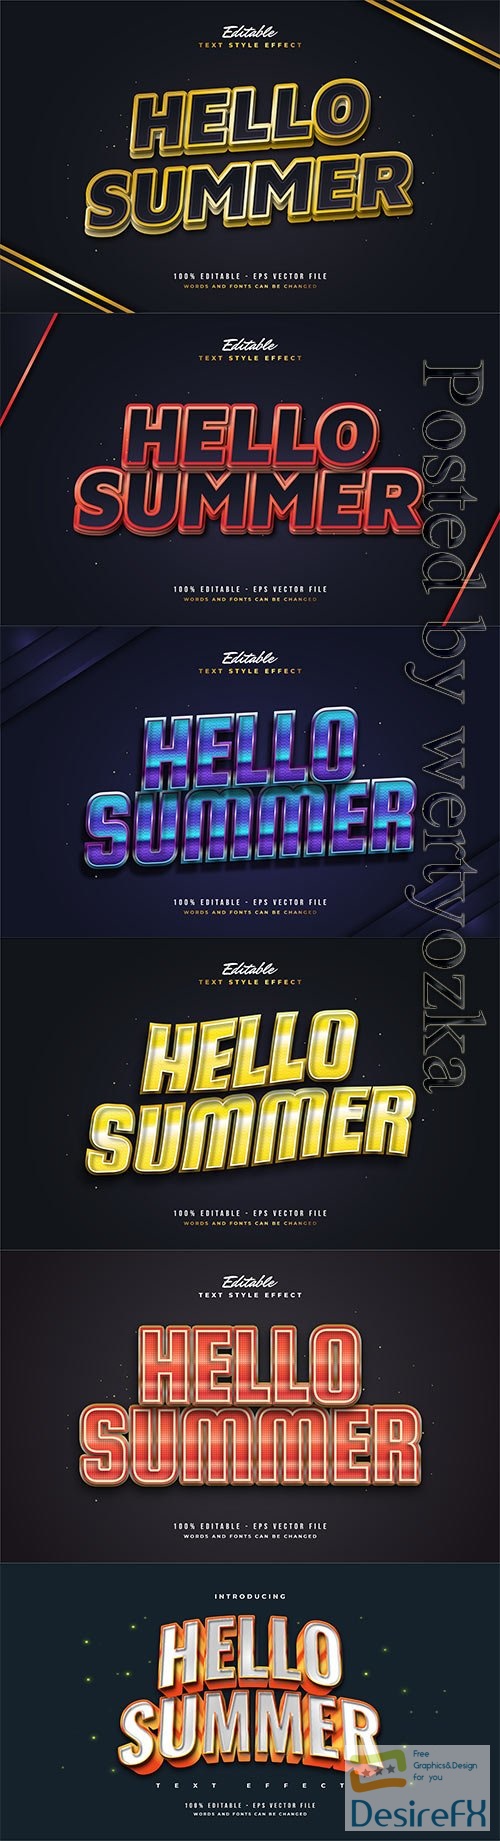 Hello summer text with vintage style